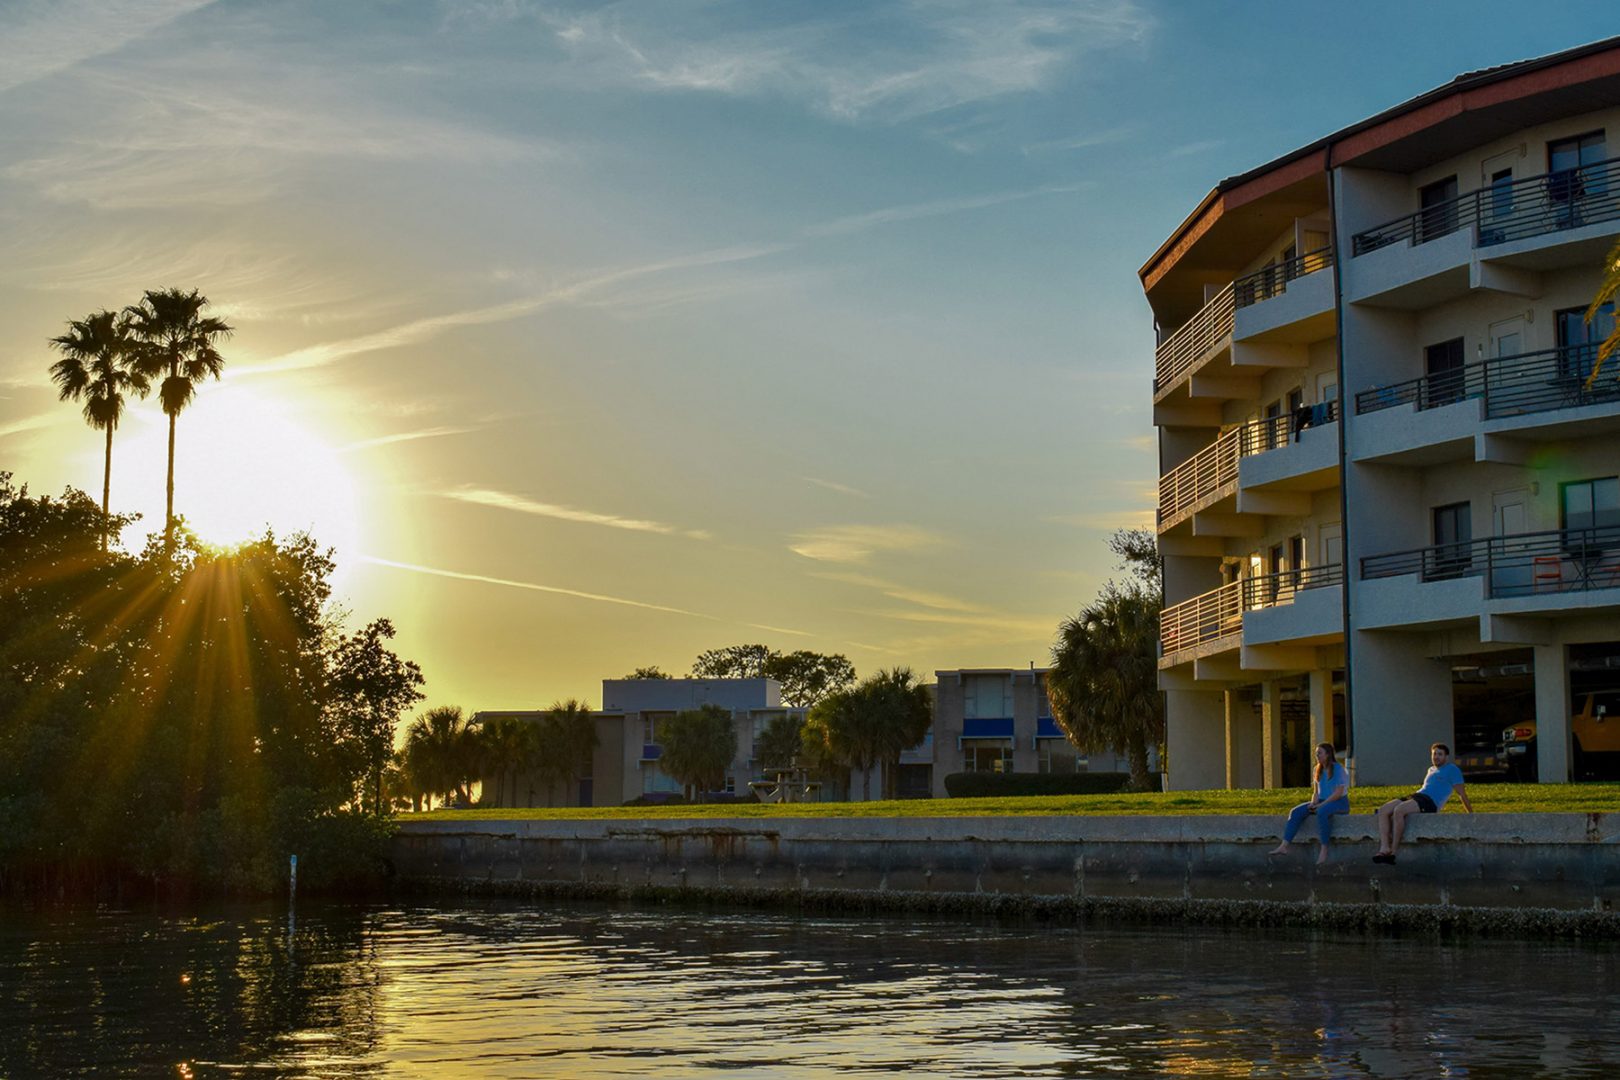 Students sit along the seawall next to the Omega residence hall at Eckerd College